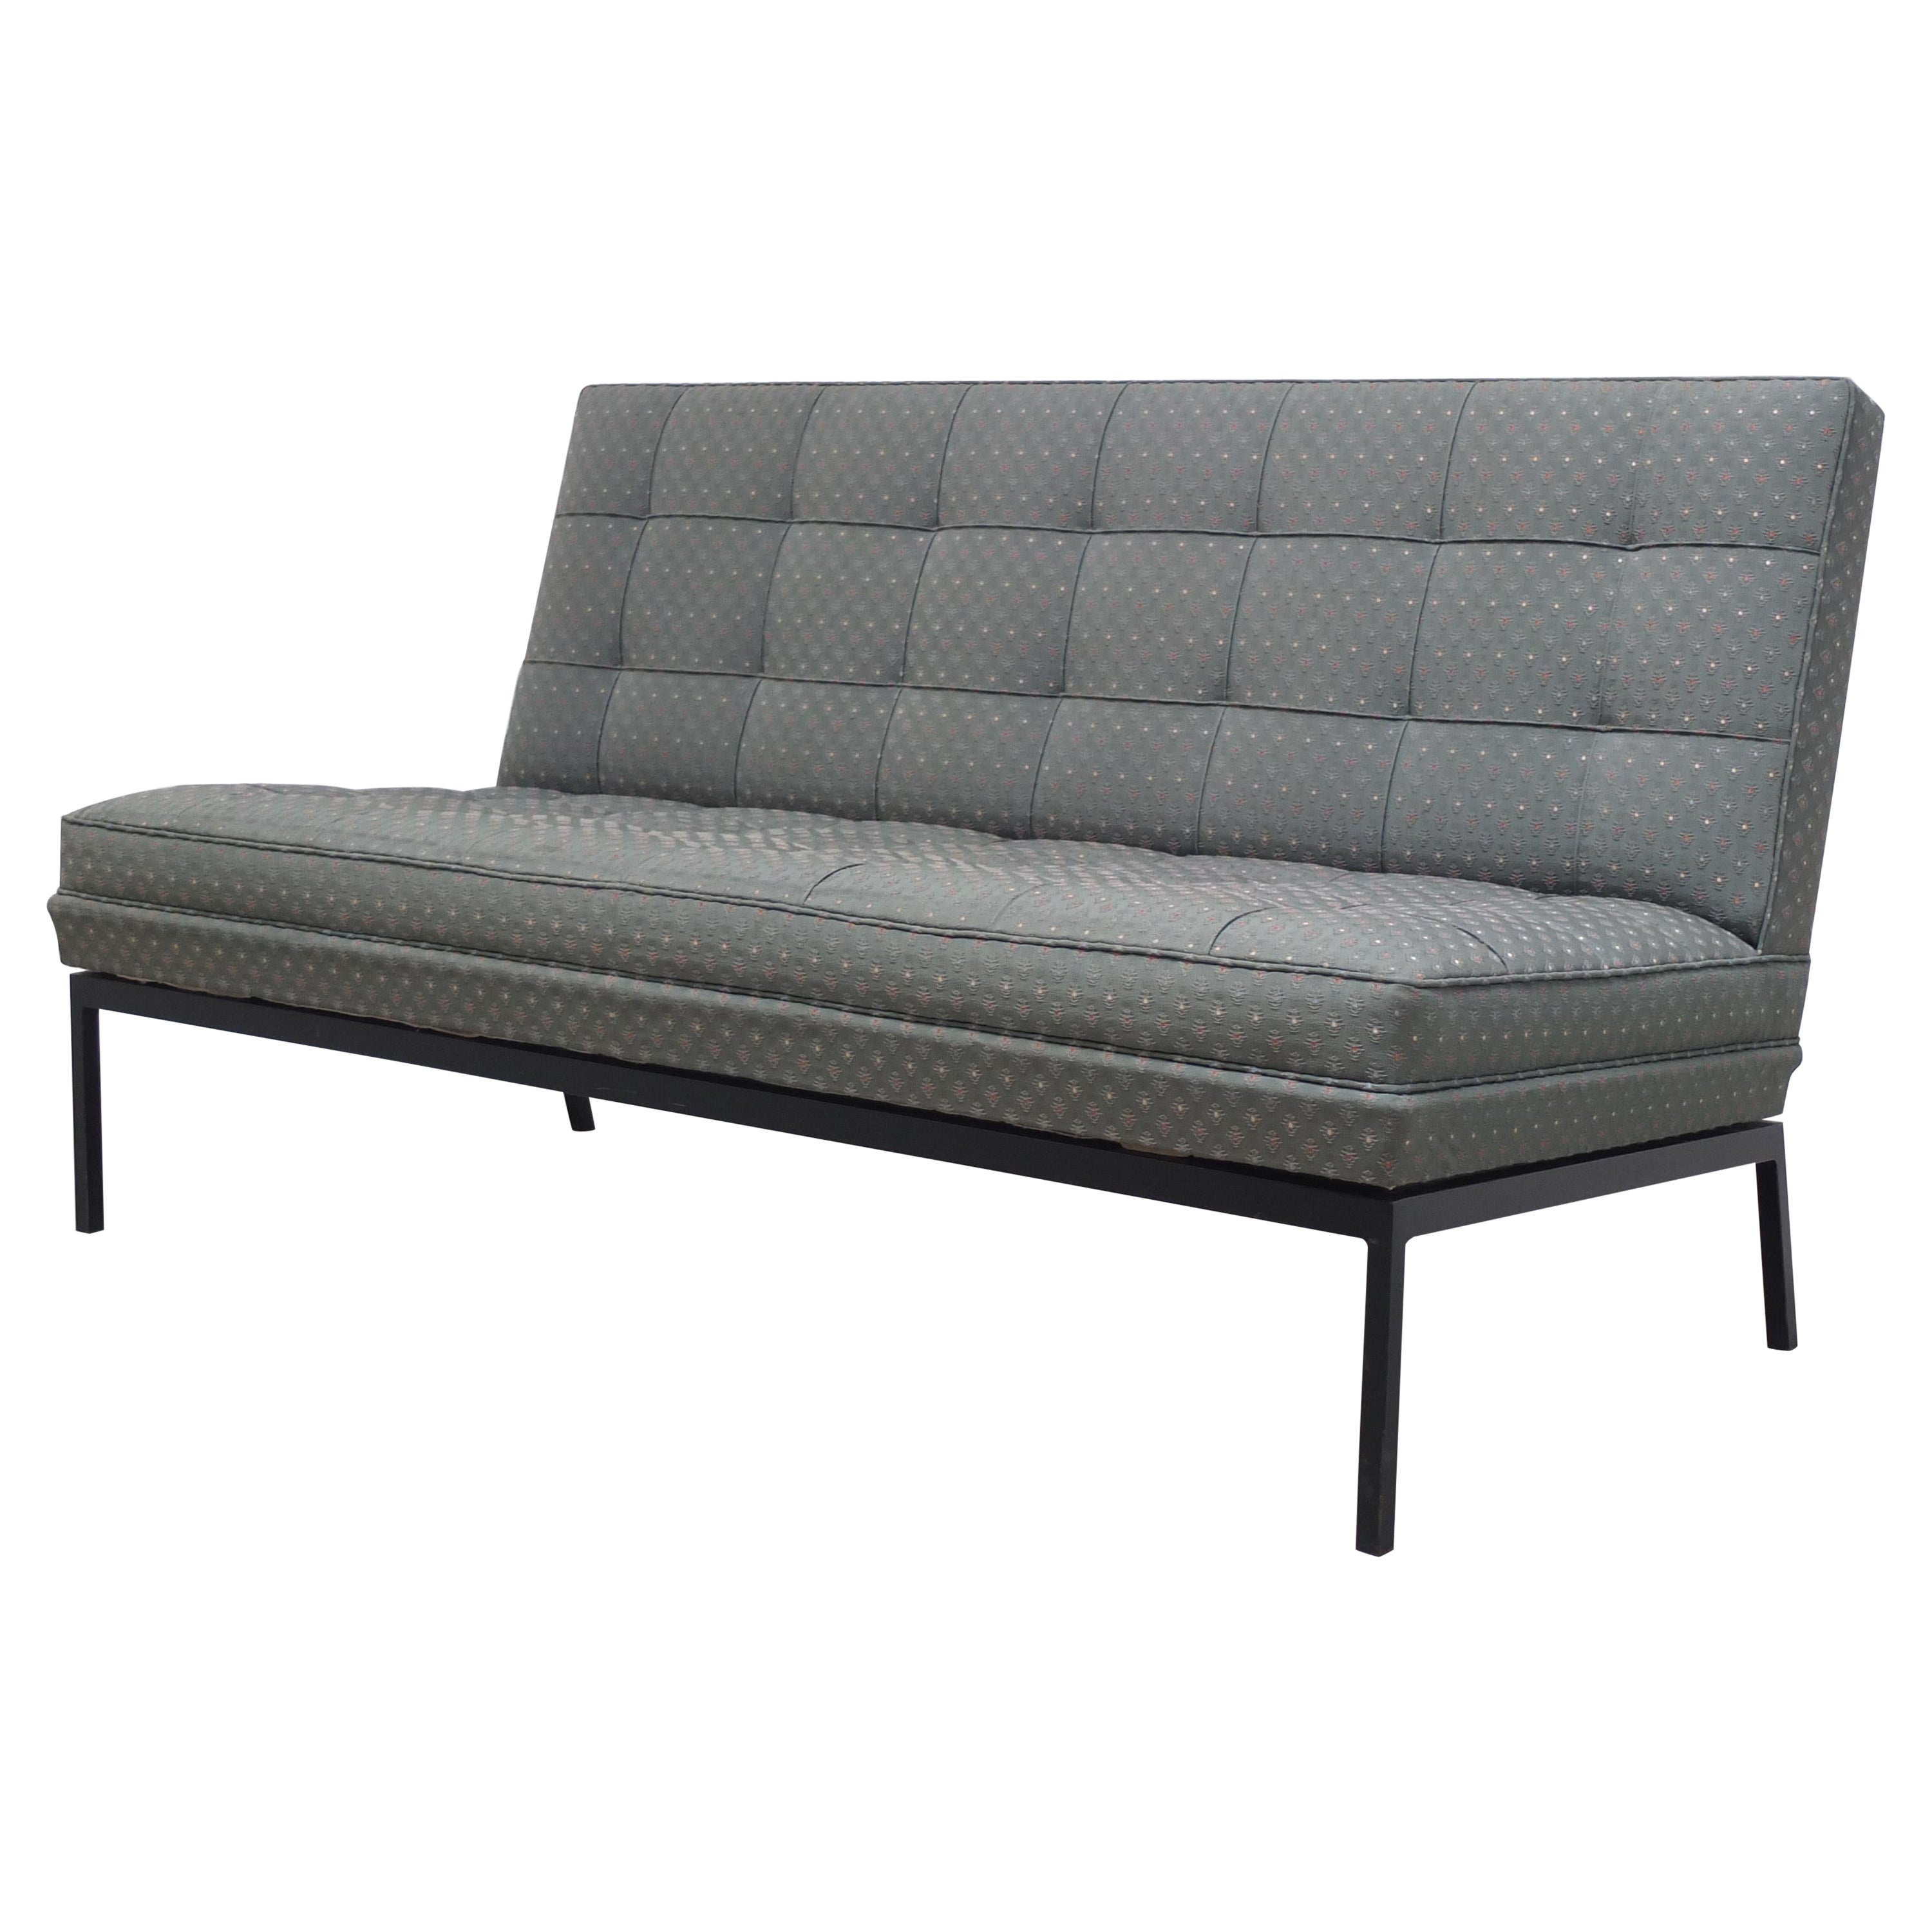 Rare 'Model 66' 2-Seater Sofa by Florence Knoll for Knoll International, 1950s For Sale